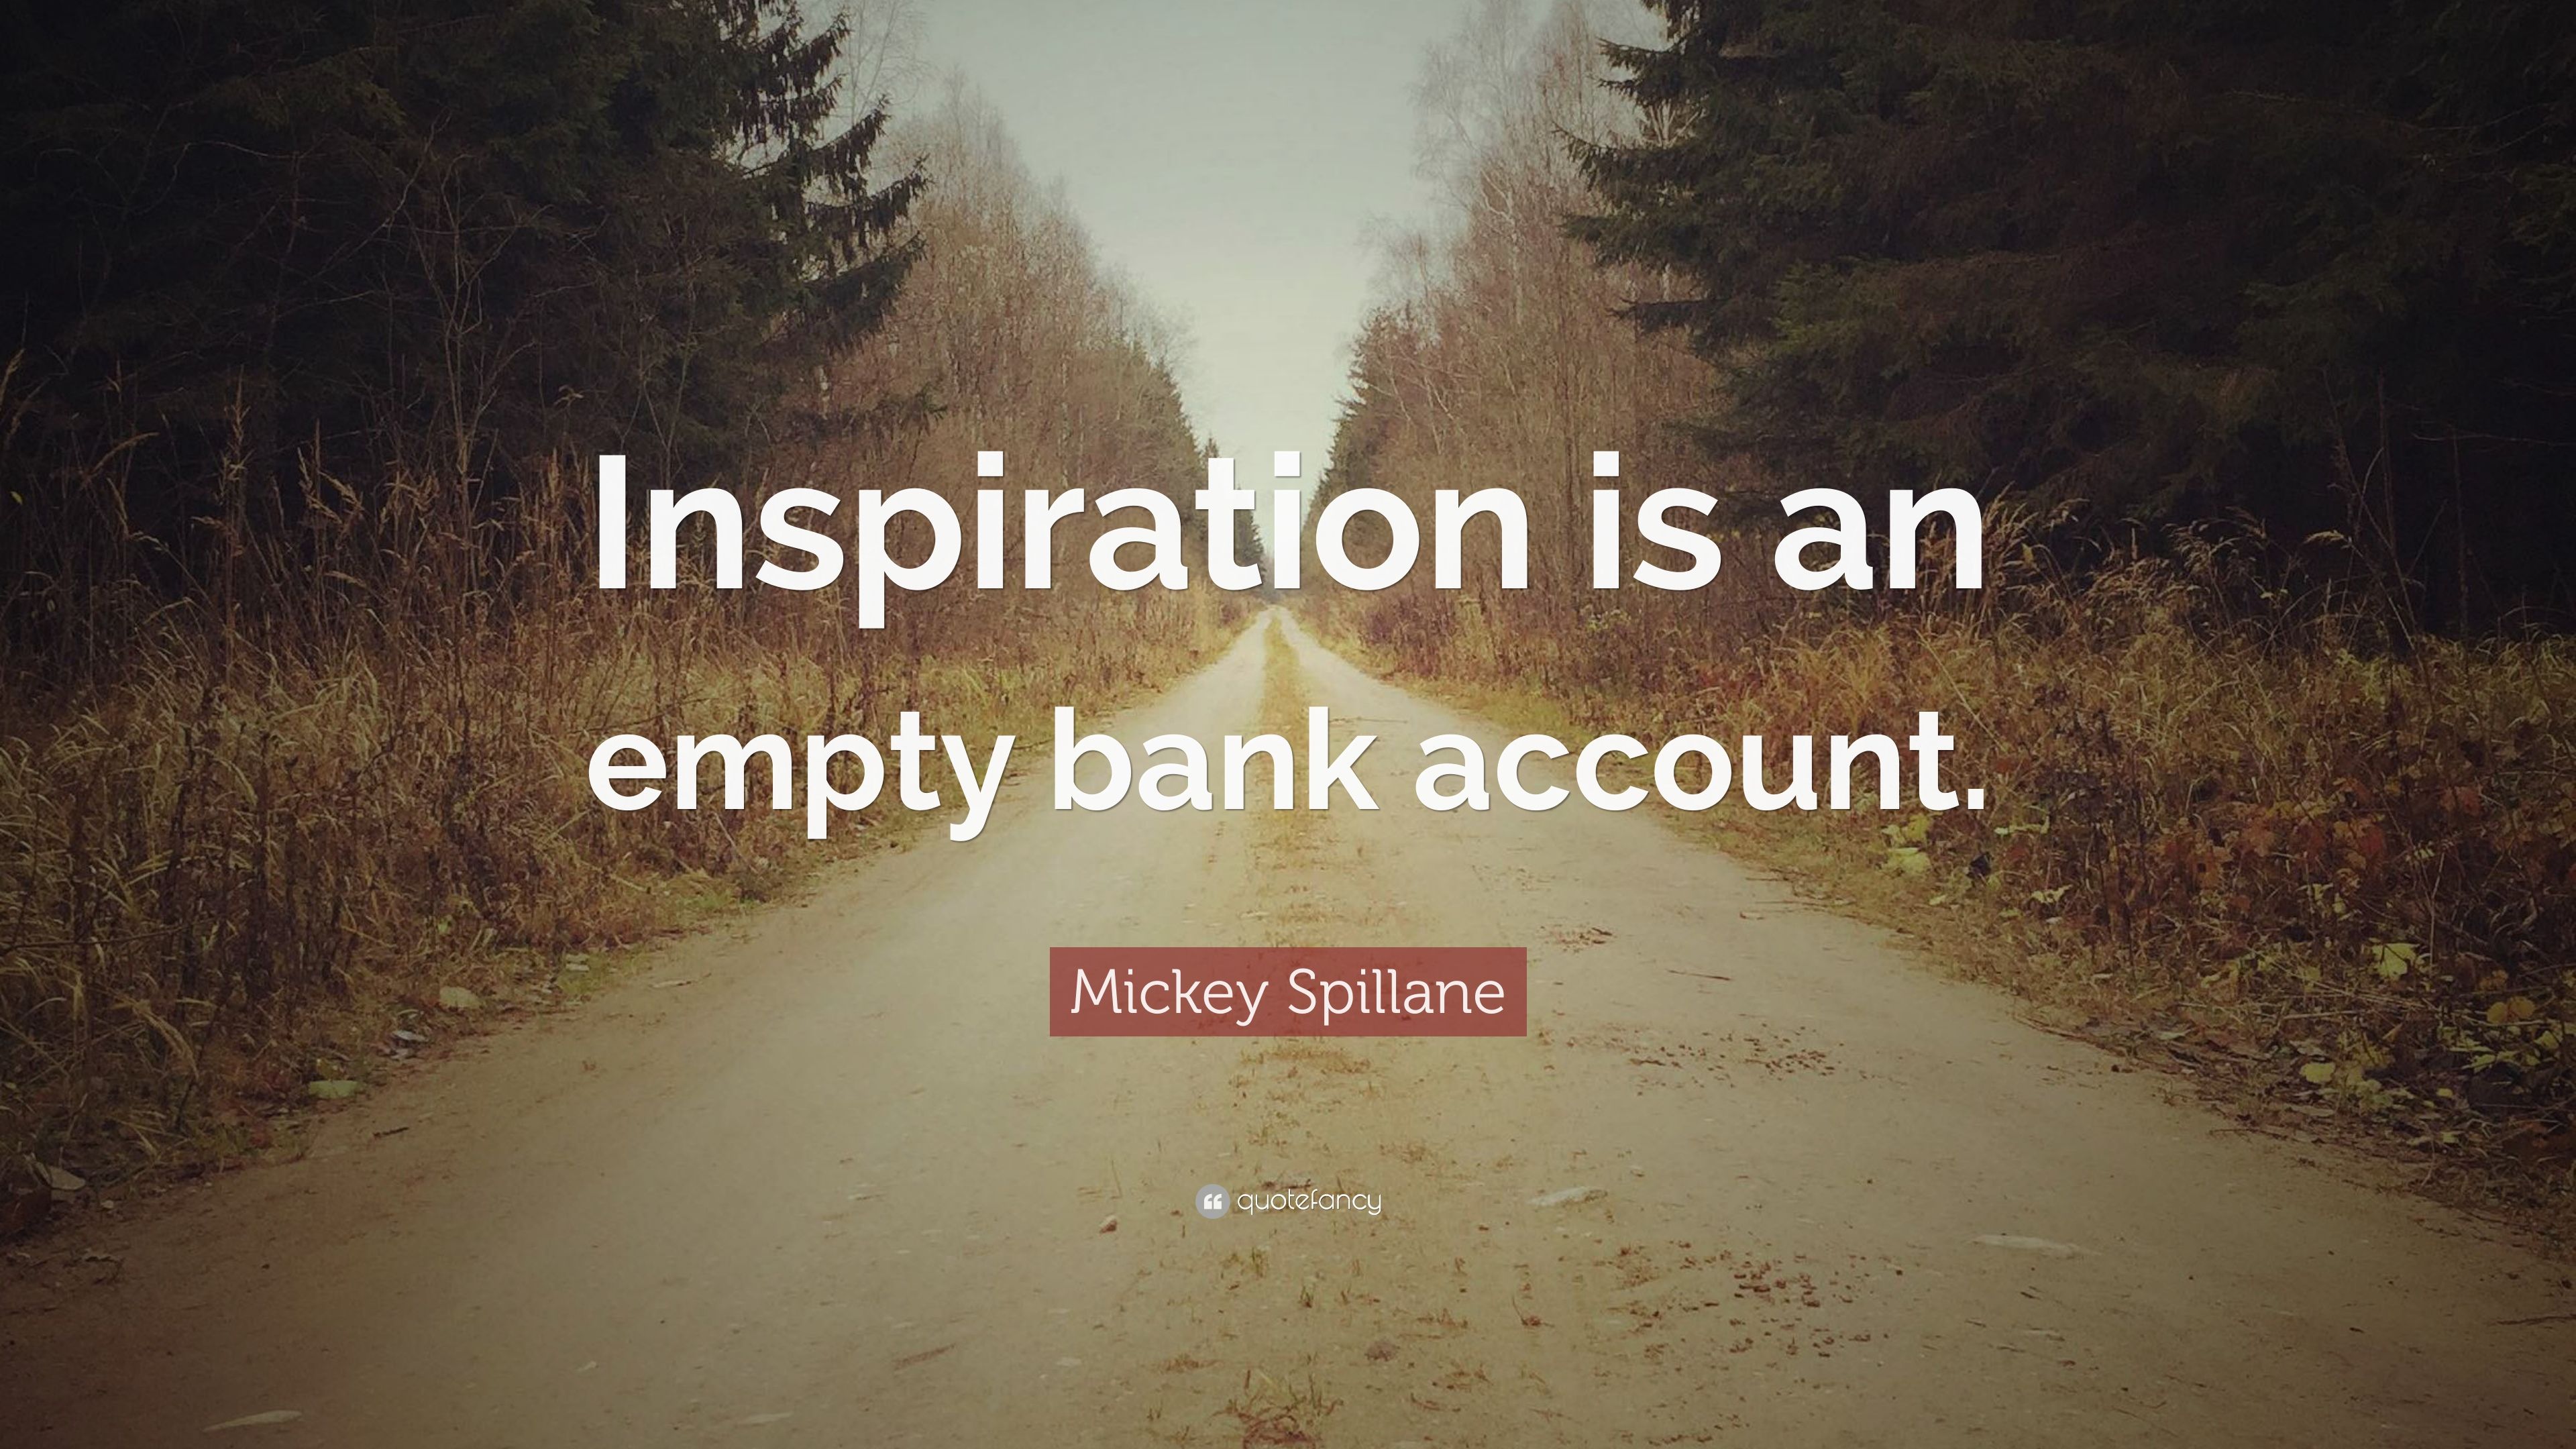 Inspiration is an empty bank account .quotefancy.com